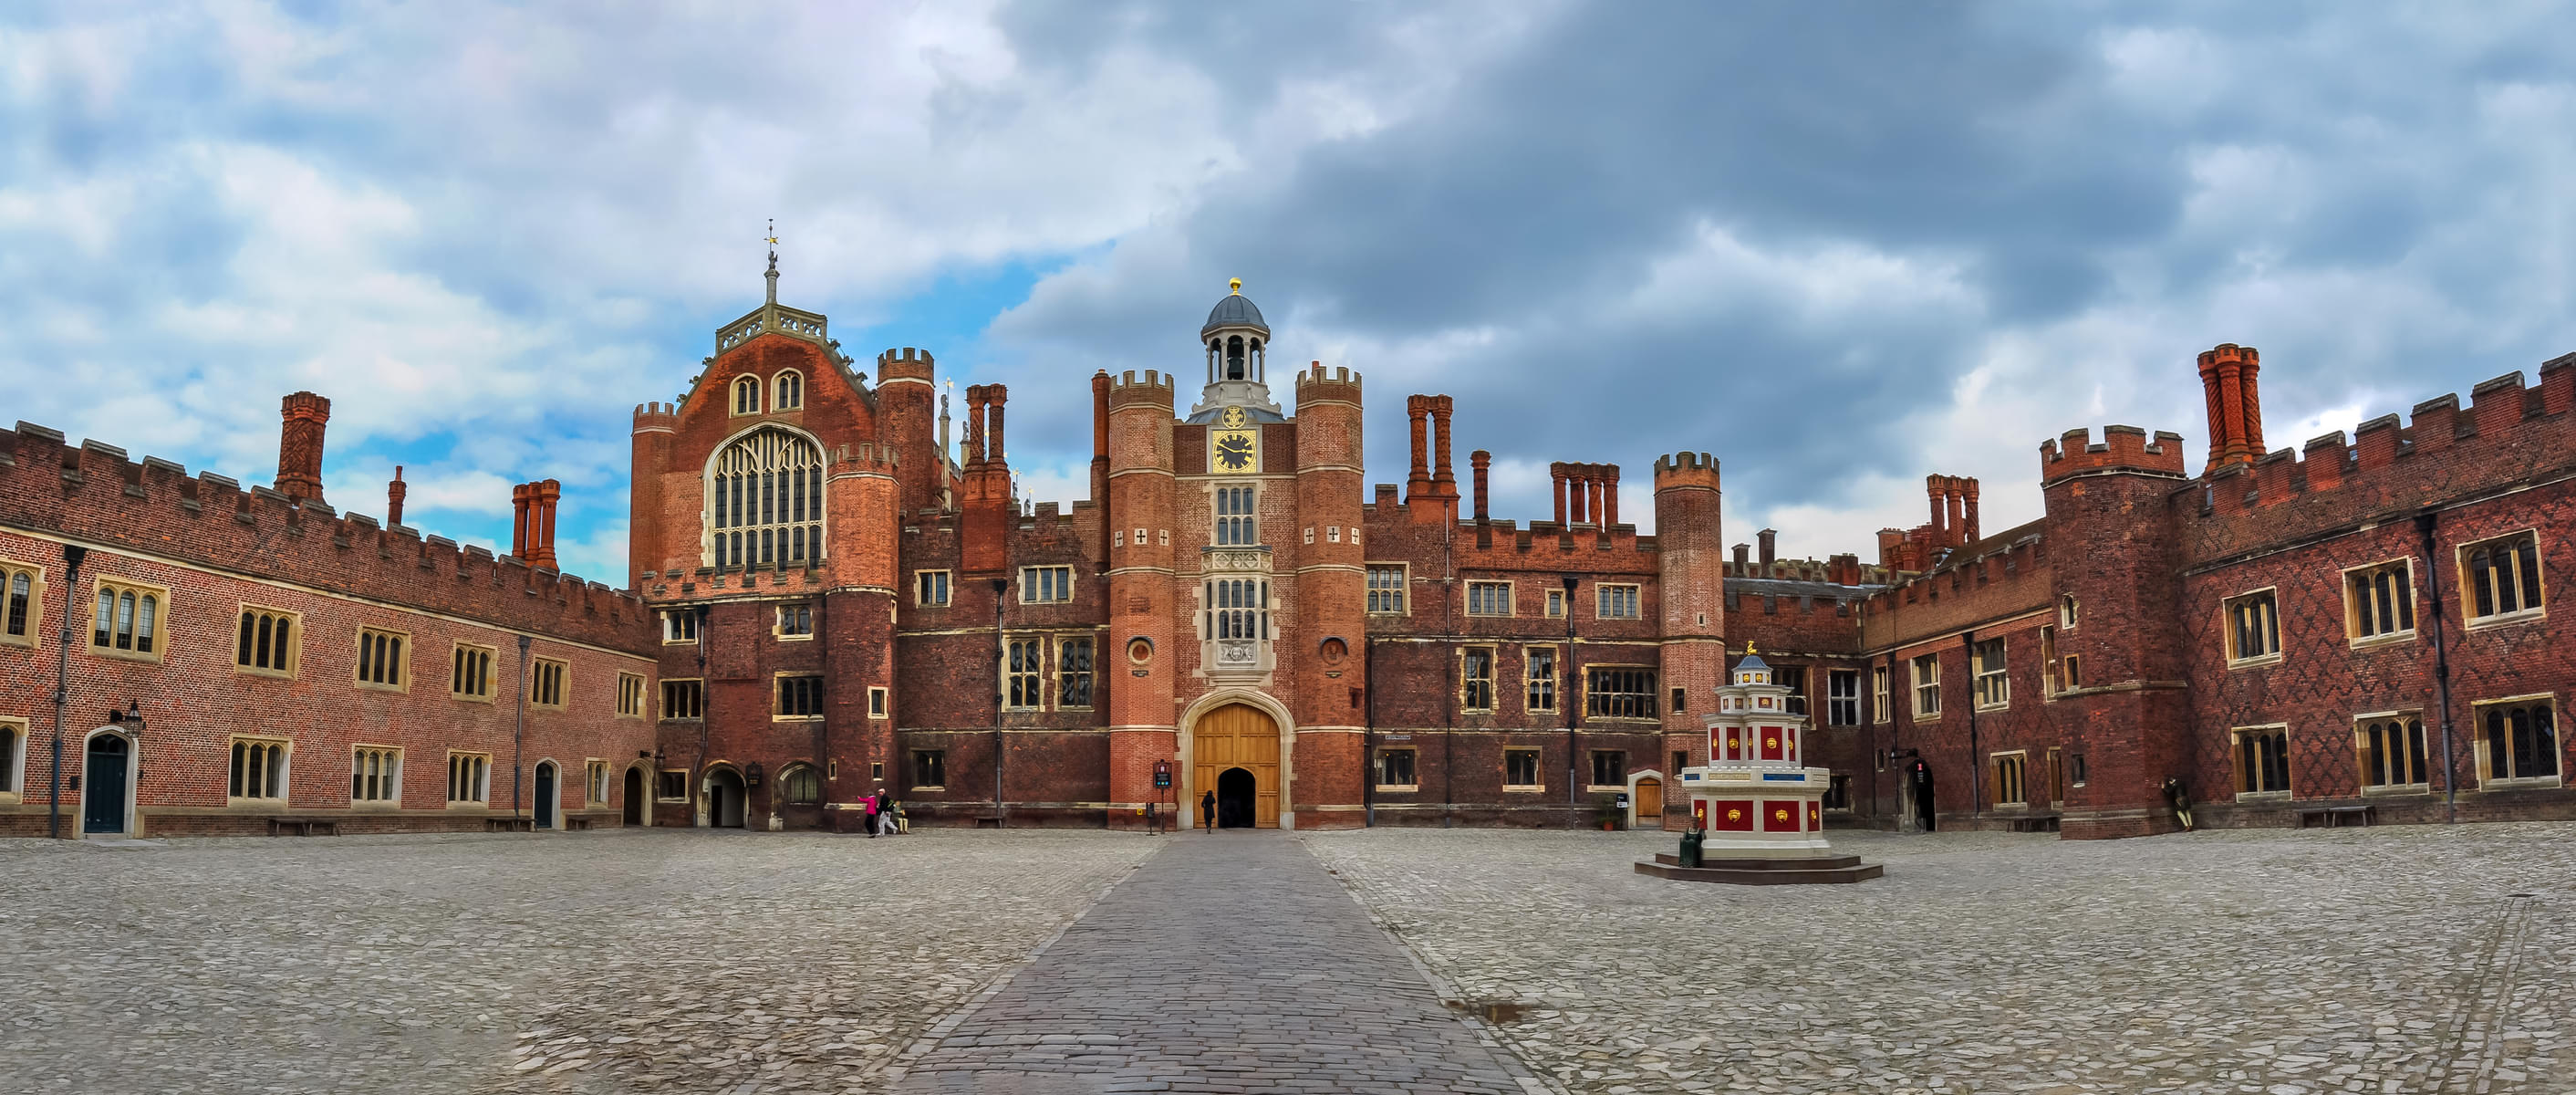 Embark on a journey to Hampton Court Palace